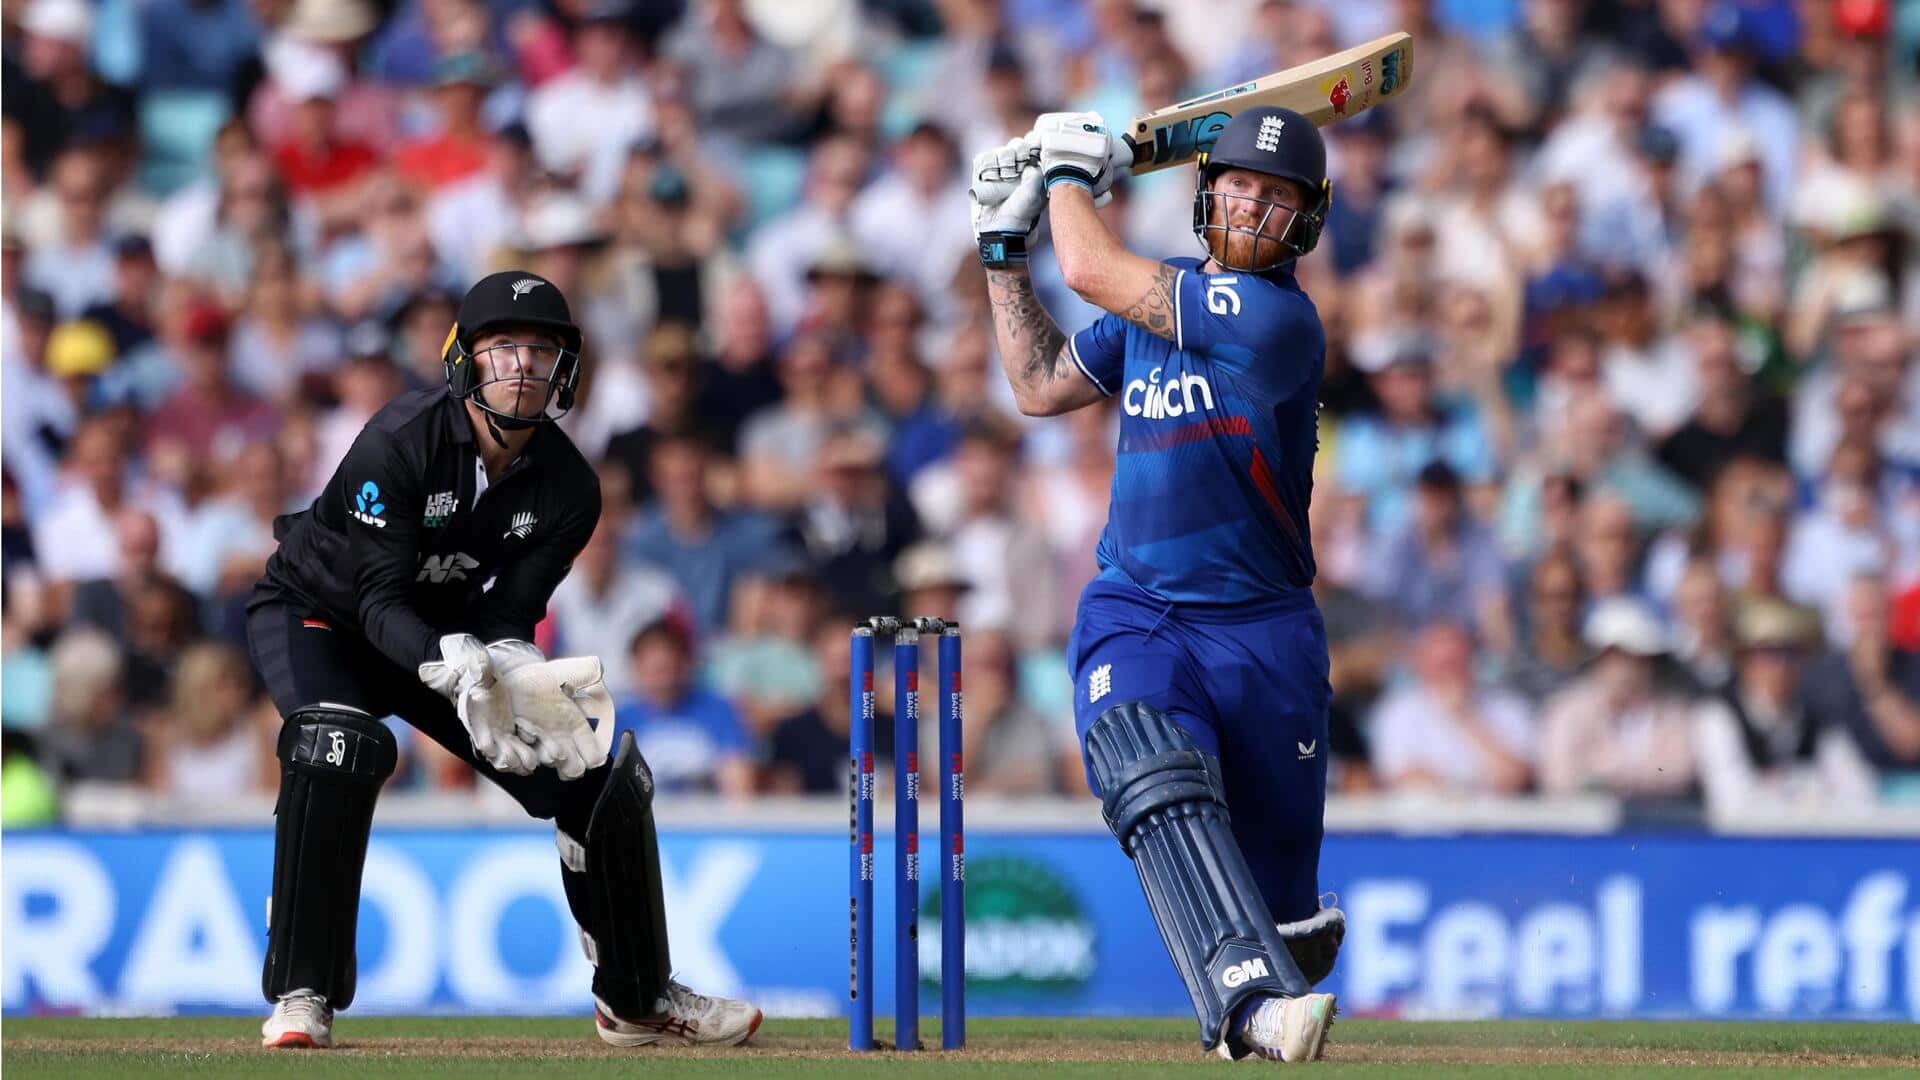 4th ODI: Confident England host NZ at Lord's in decider